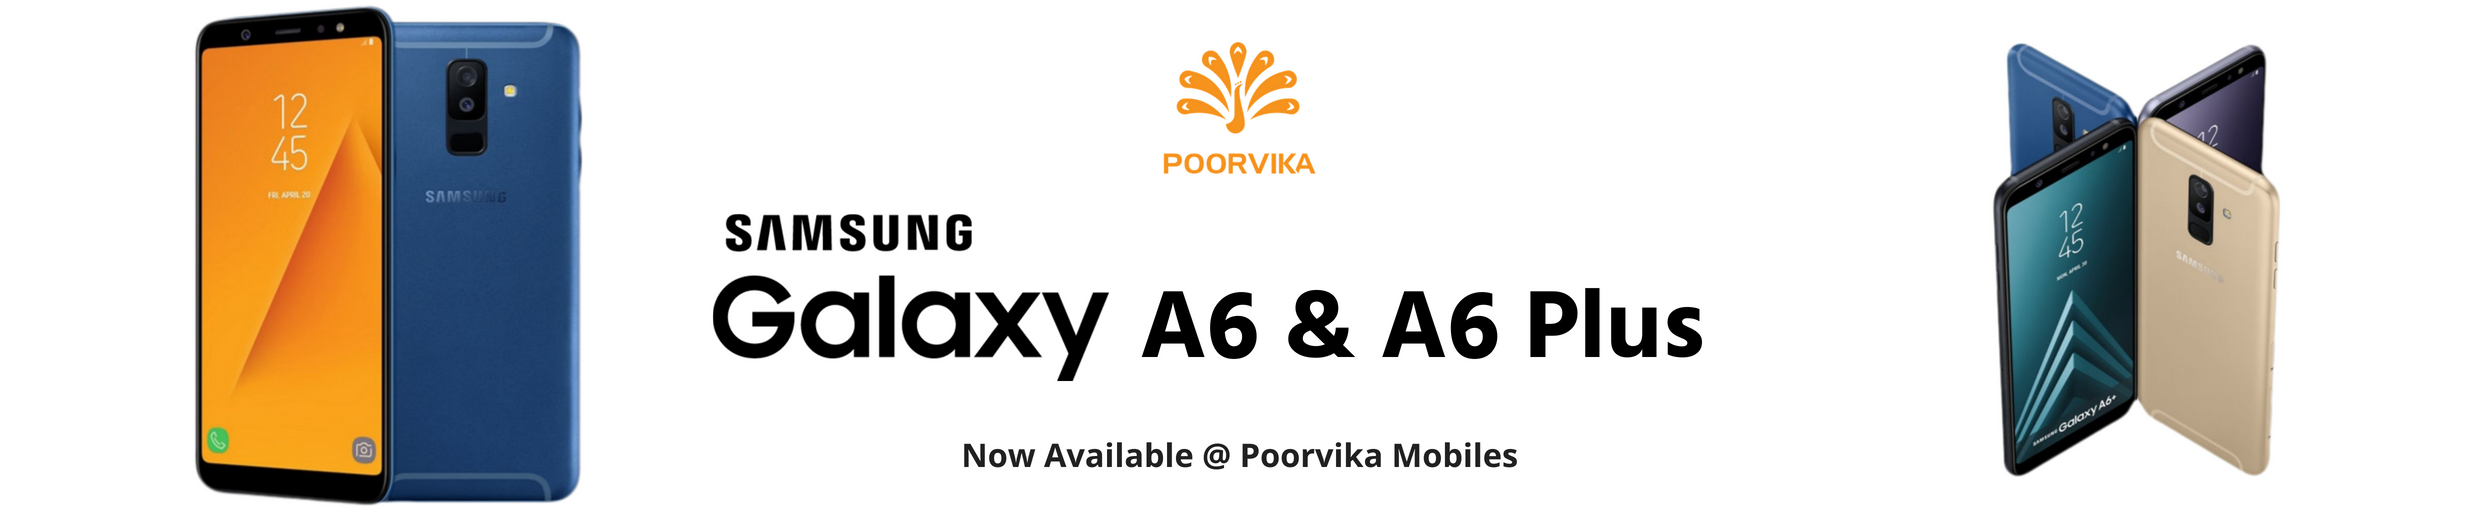 New Samsung Galaxy A6 & A6 Plus now available at Poorvika Mobiles